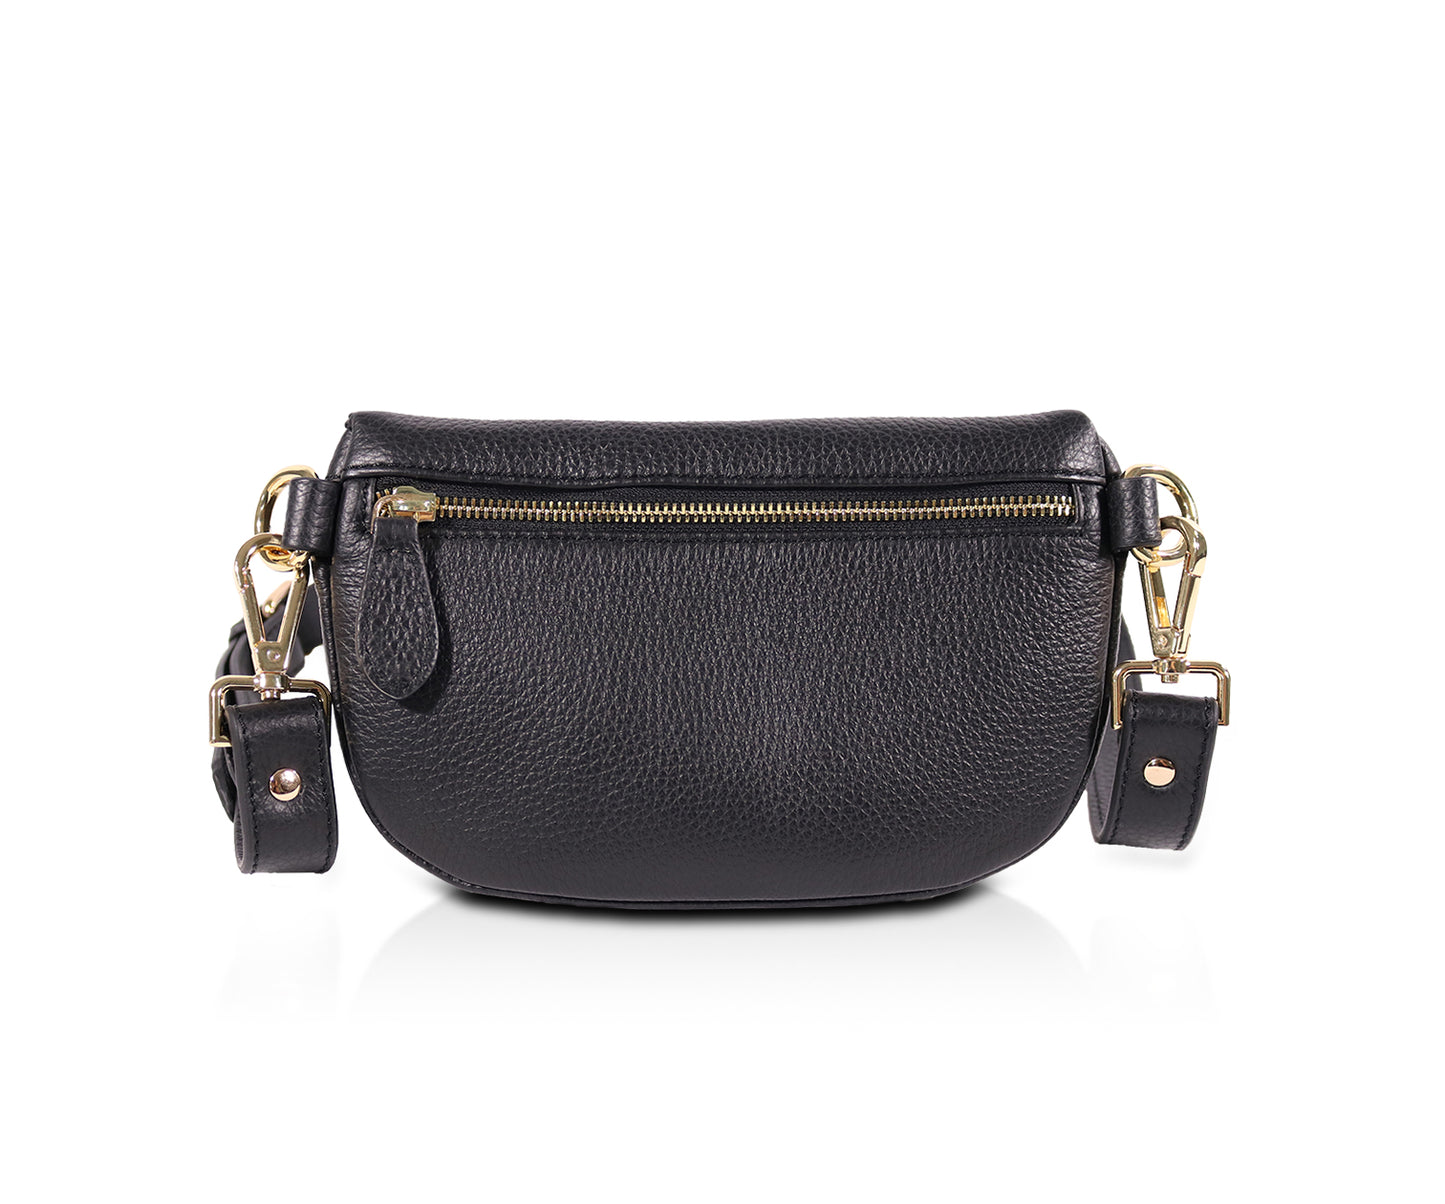 Leather Fanny Pack | Mustard